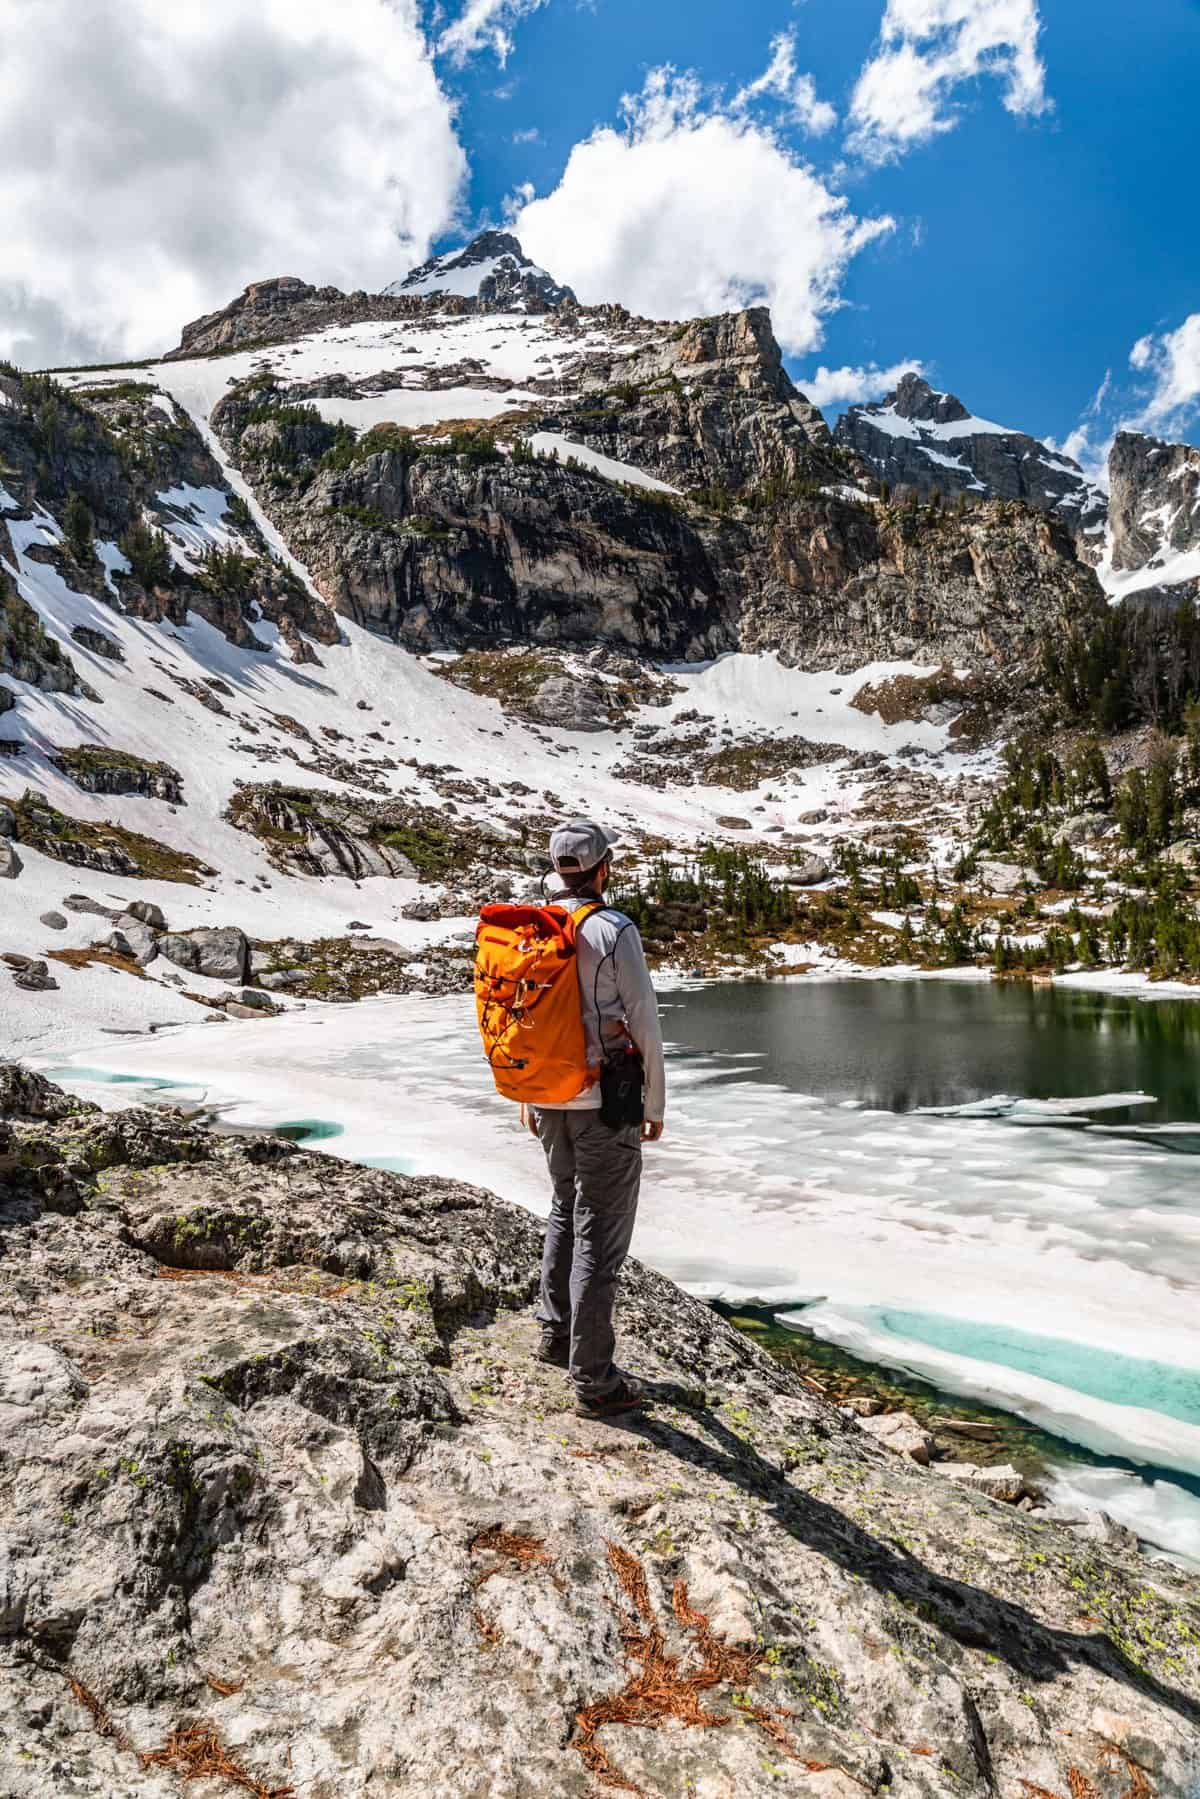 Tall rocky mountain peaks dusted in snow with a partially frozen deep blue lake below and a man with an orange backpack standing on a rock looking at the lake.